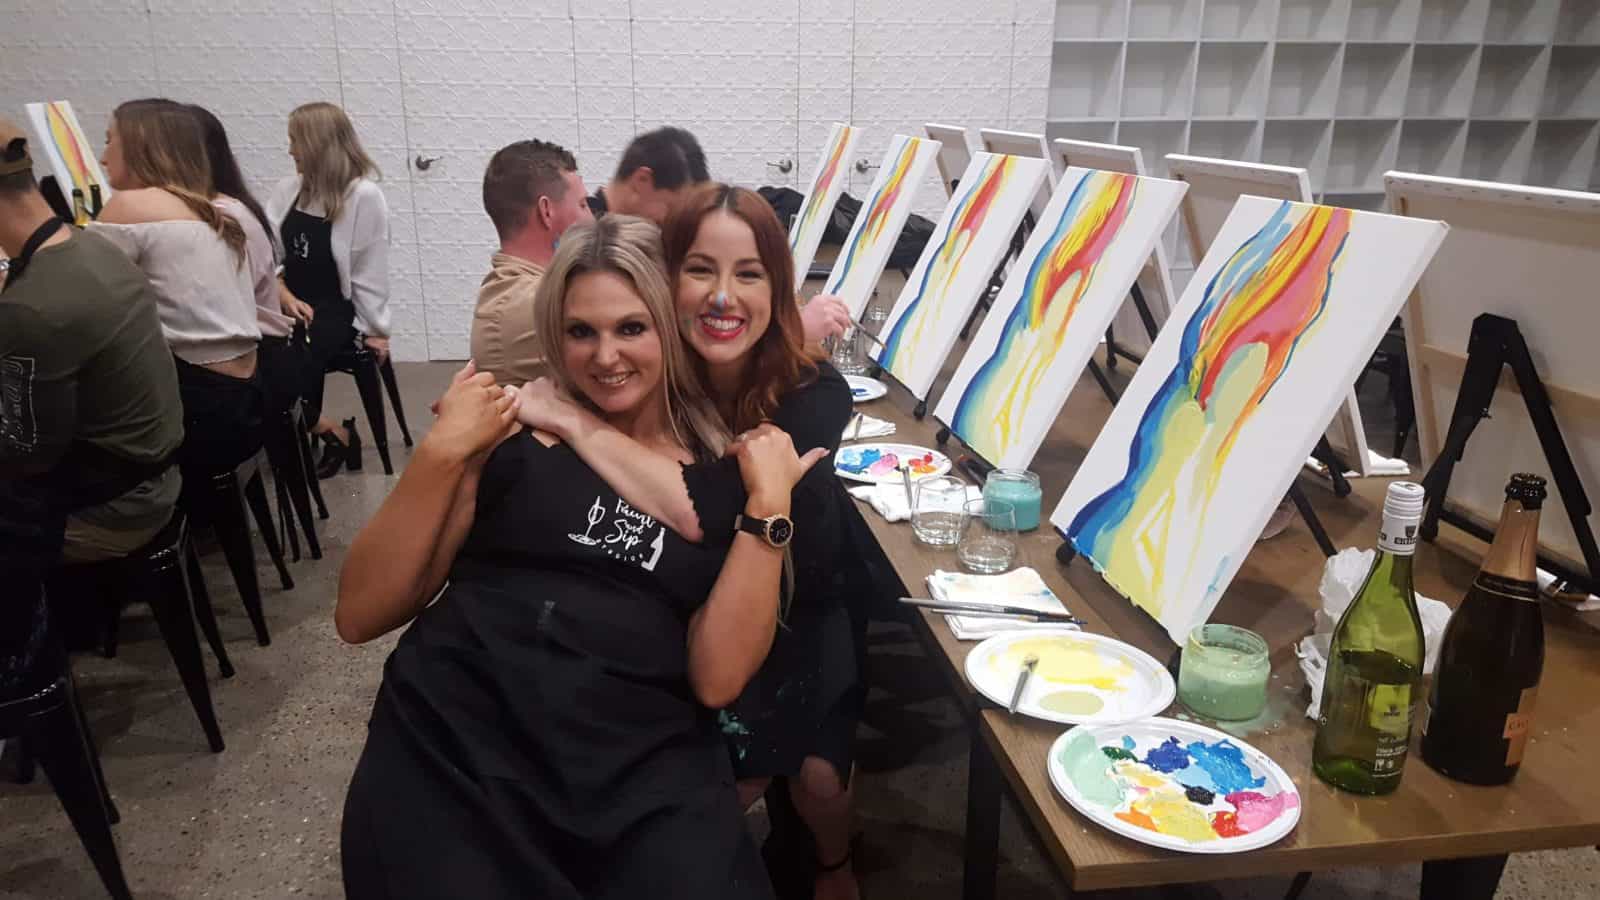 Friends having fun at Paint and Sip